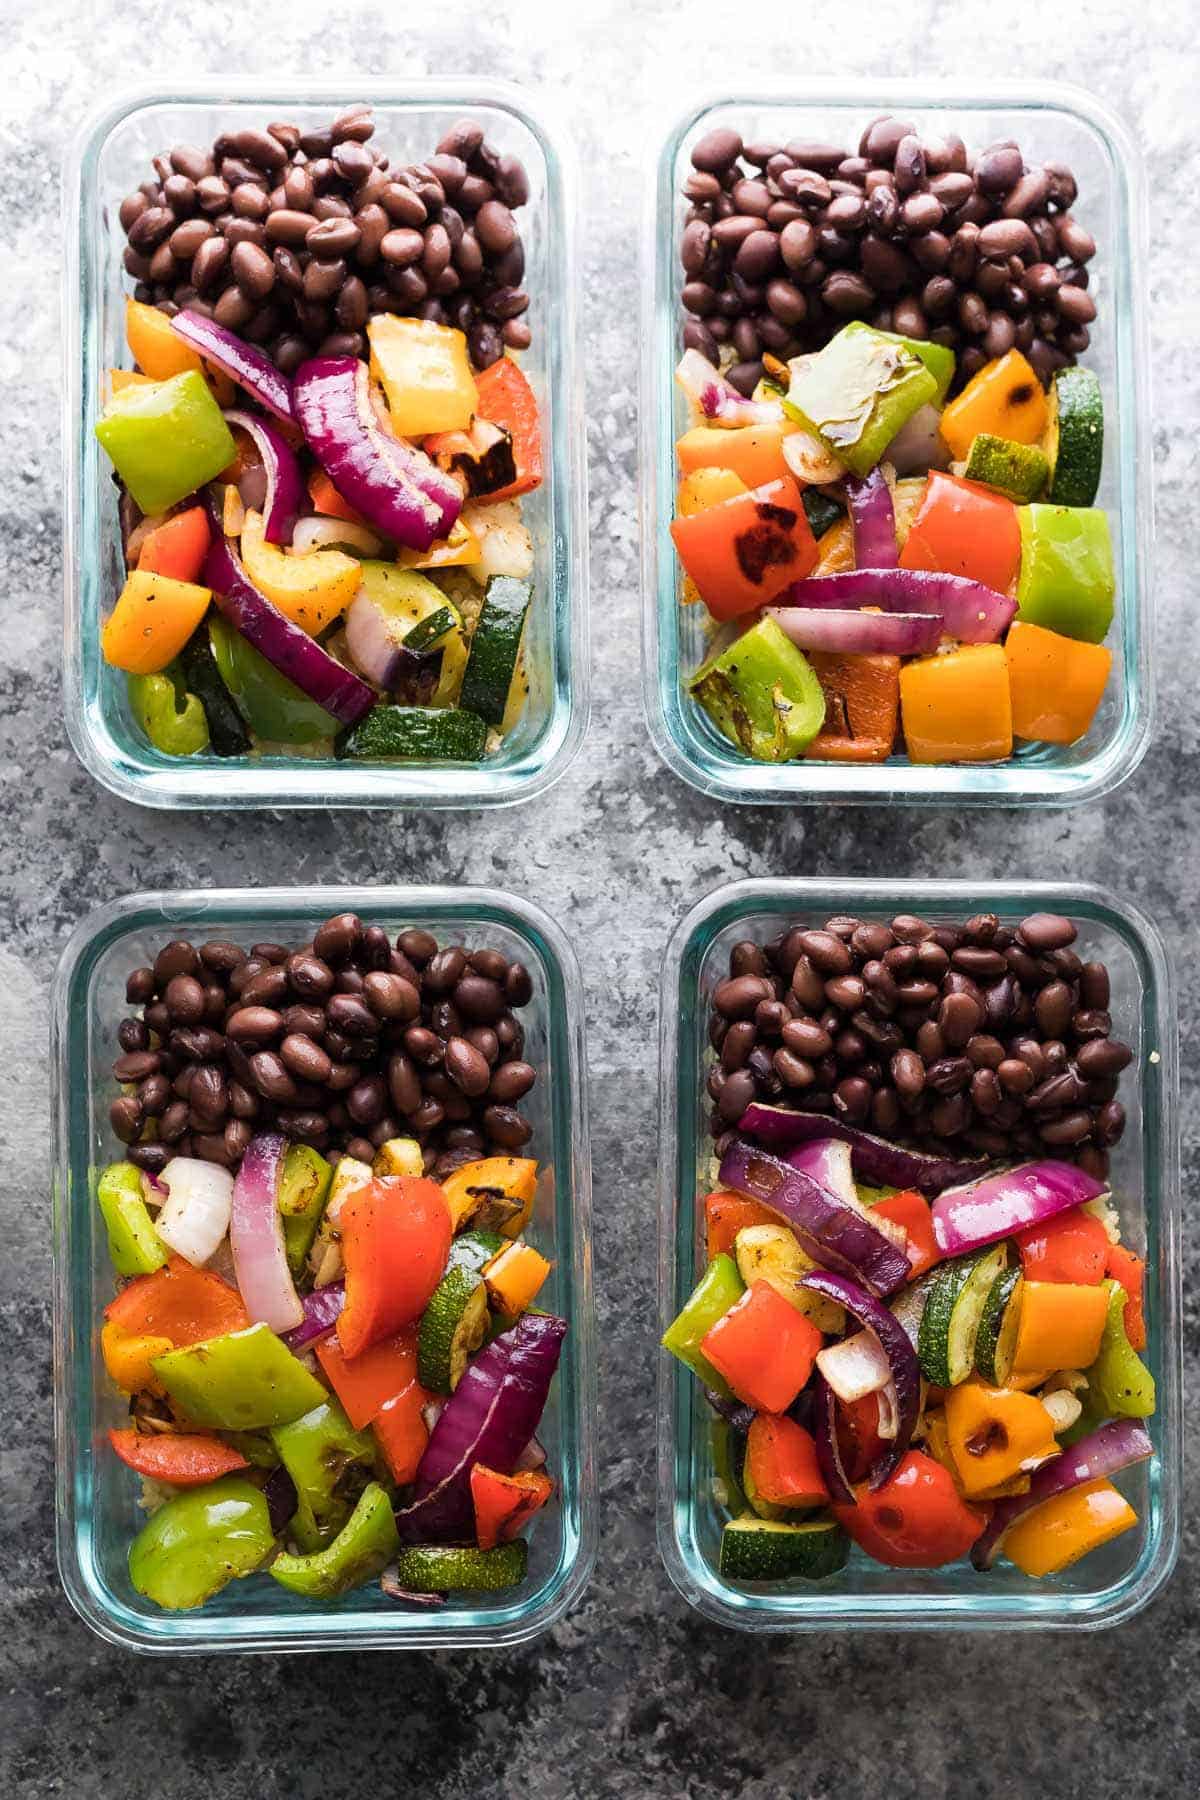 How to Meal Prep Salads (18 Lunch Bowl Ideas) - Cook Eat Live Love